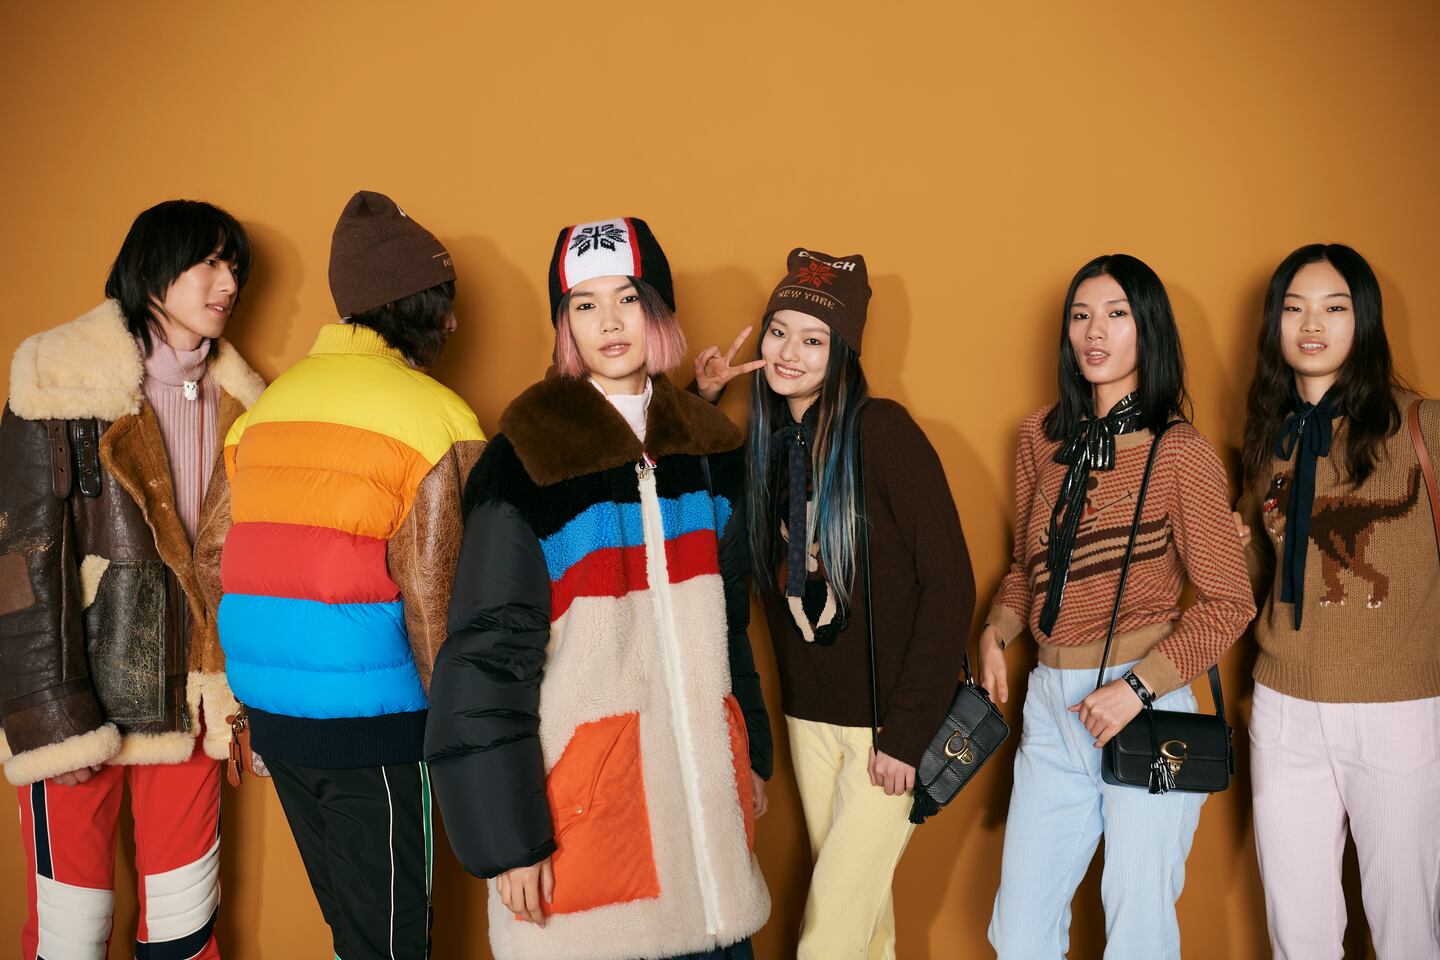 Coached debuted its Winter collection with a runway show in Shanghai and a new episode of Coach TV. Coach